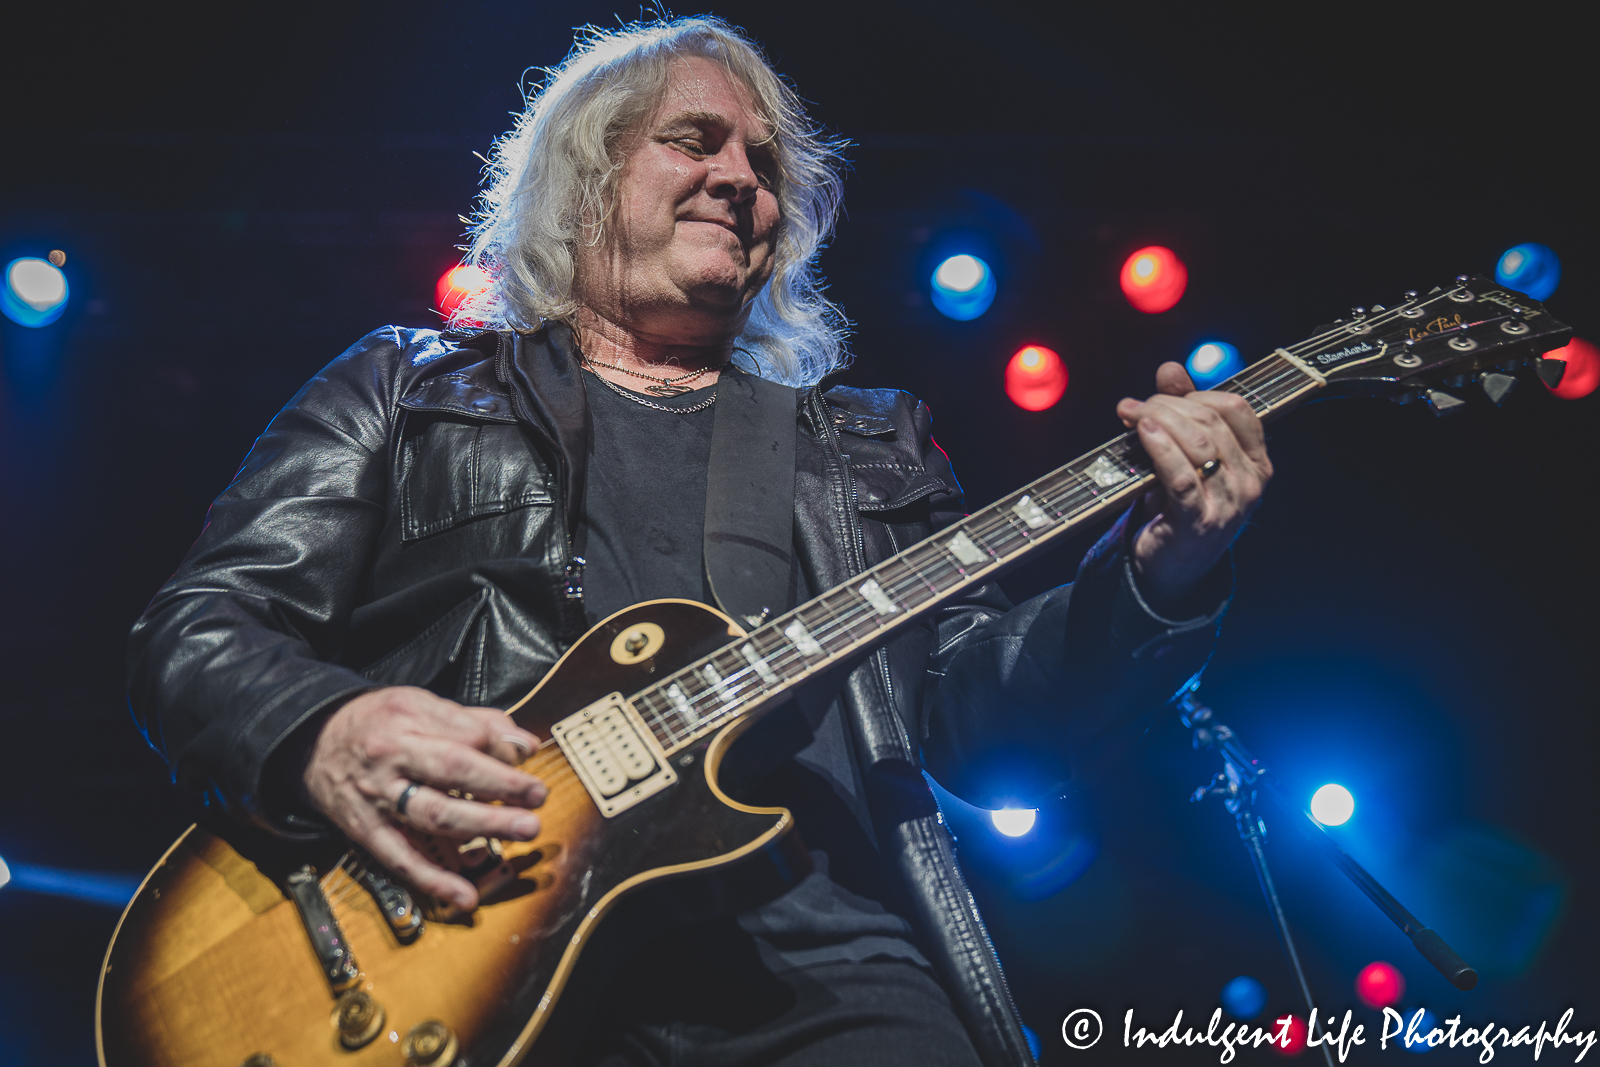 Guitarist Rusty Crewse of Missouri performing live in concert at Ameristar Casino's Star Pavilion in Kansas City, MO on April 9, 2022.